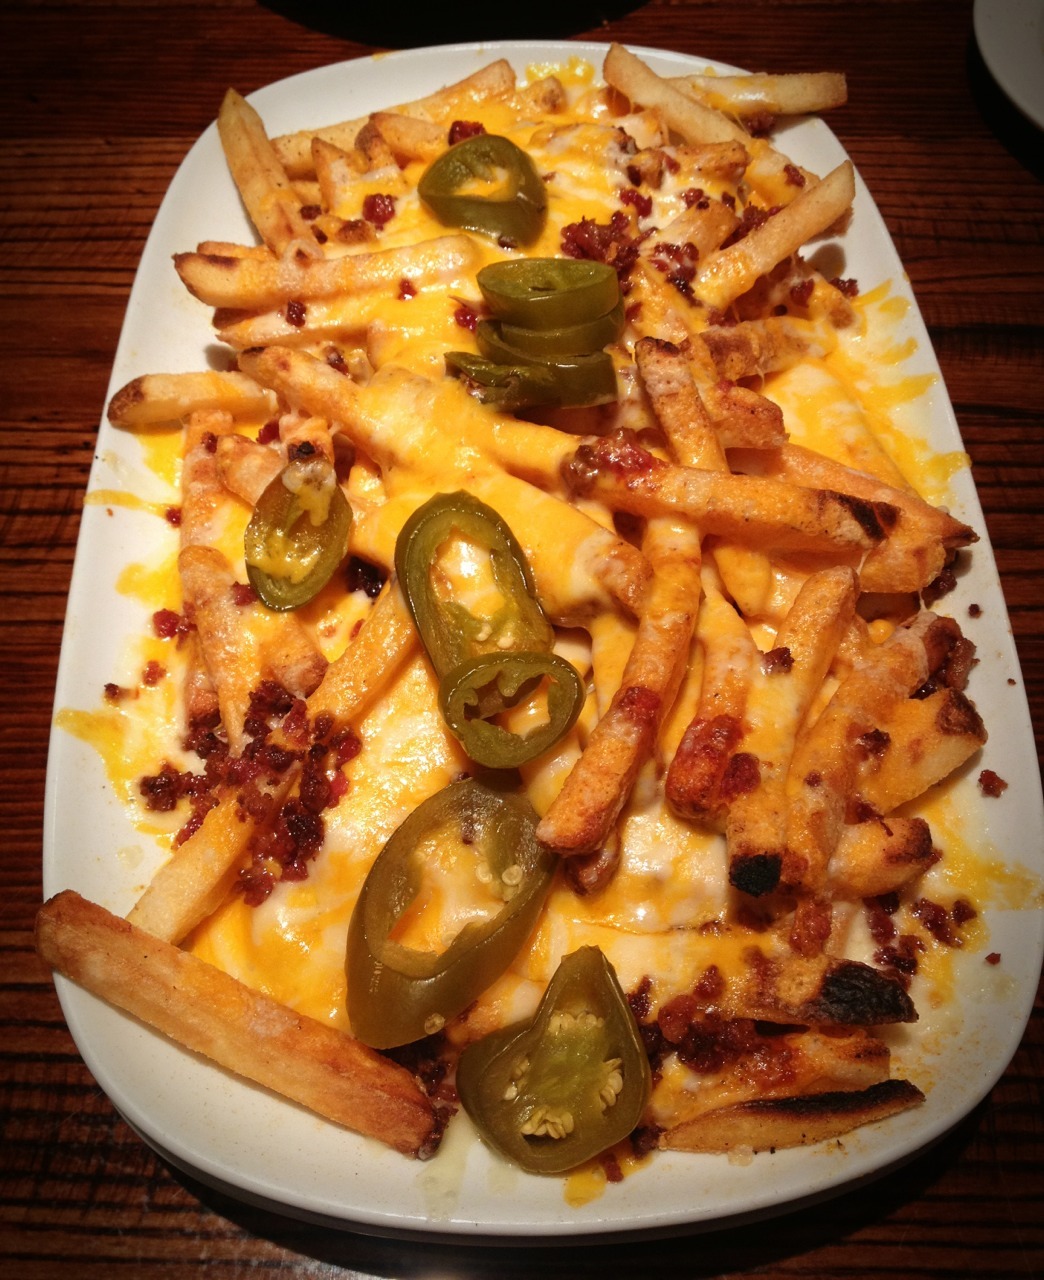 ???? TheFullBellyDiaries ???? - These had to be the largest plate of chili cheese...